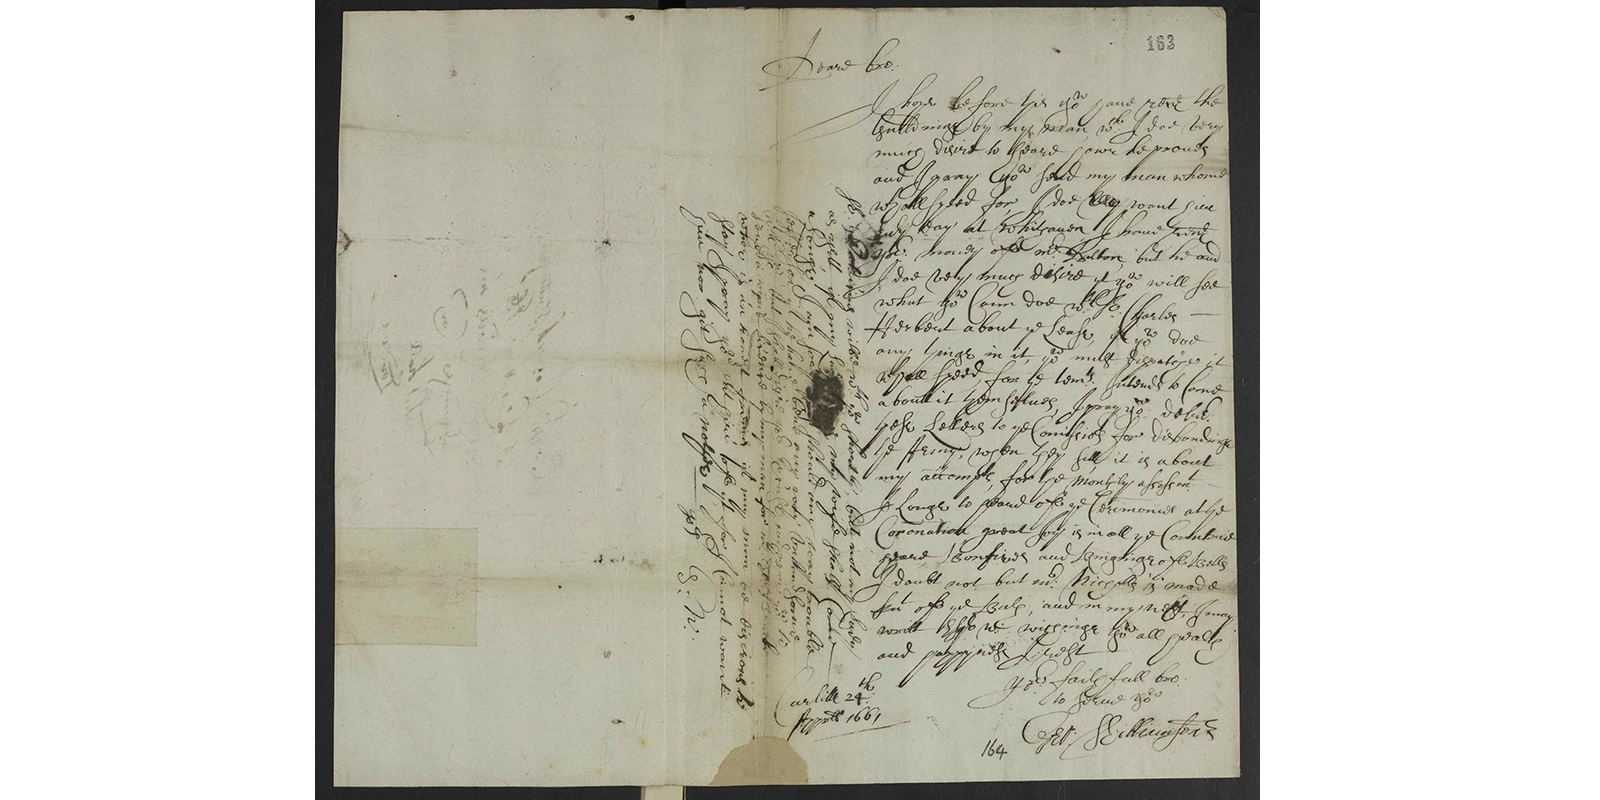 Hand-written letter concerning the coronation of Charles II.